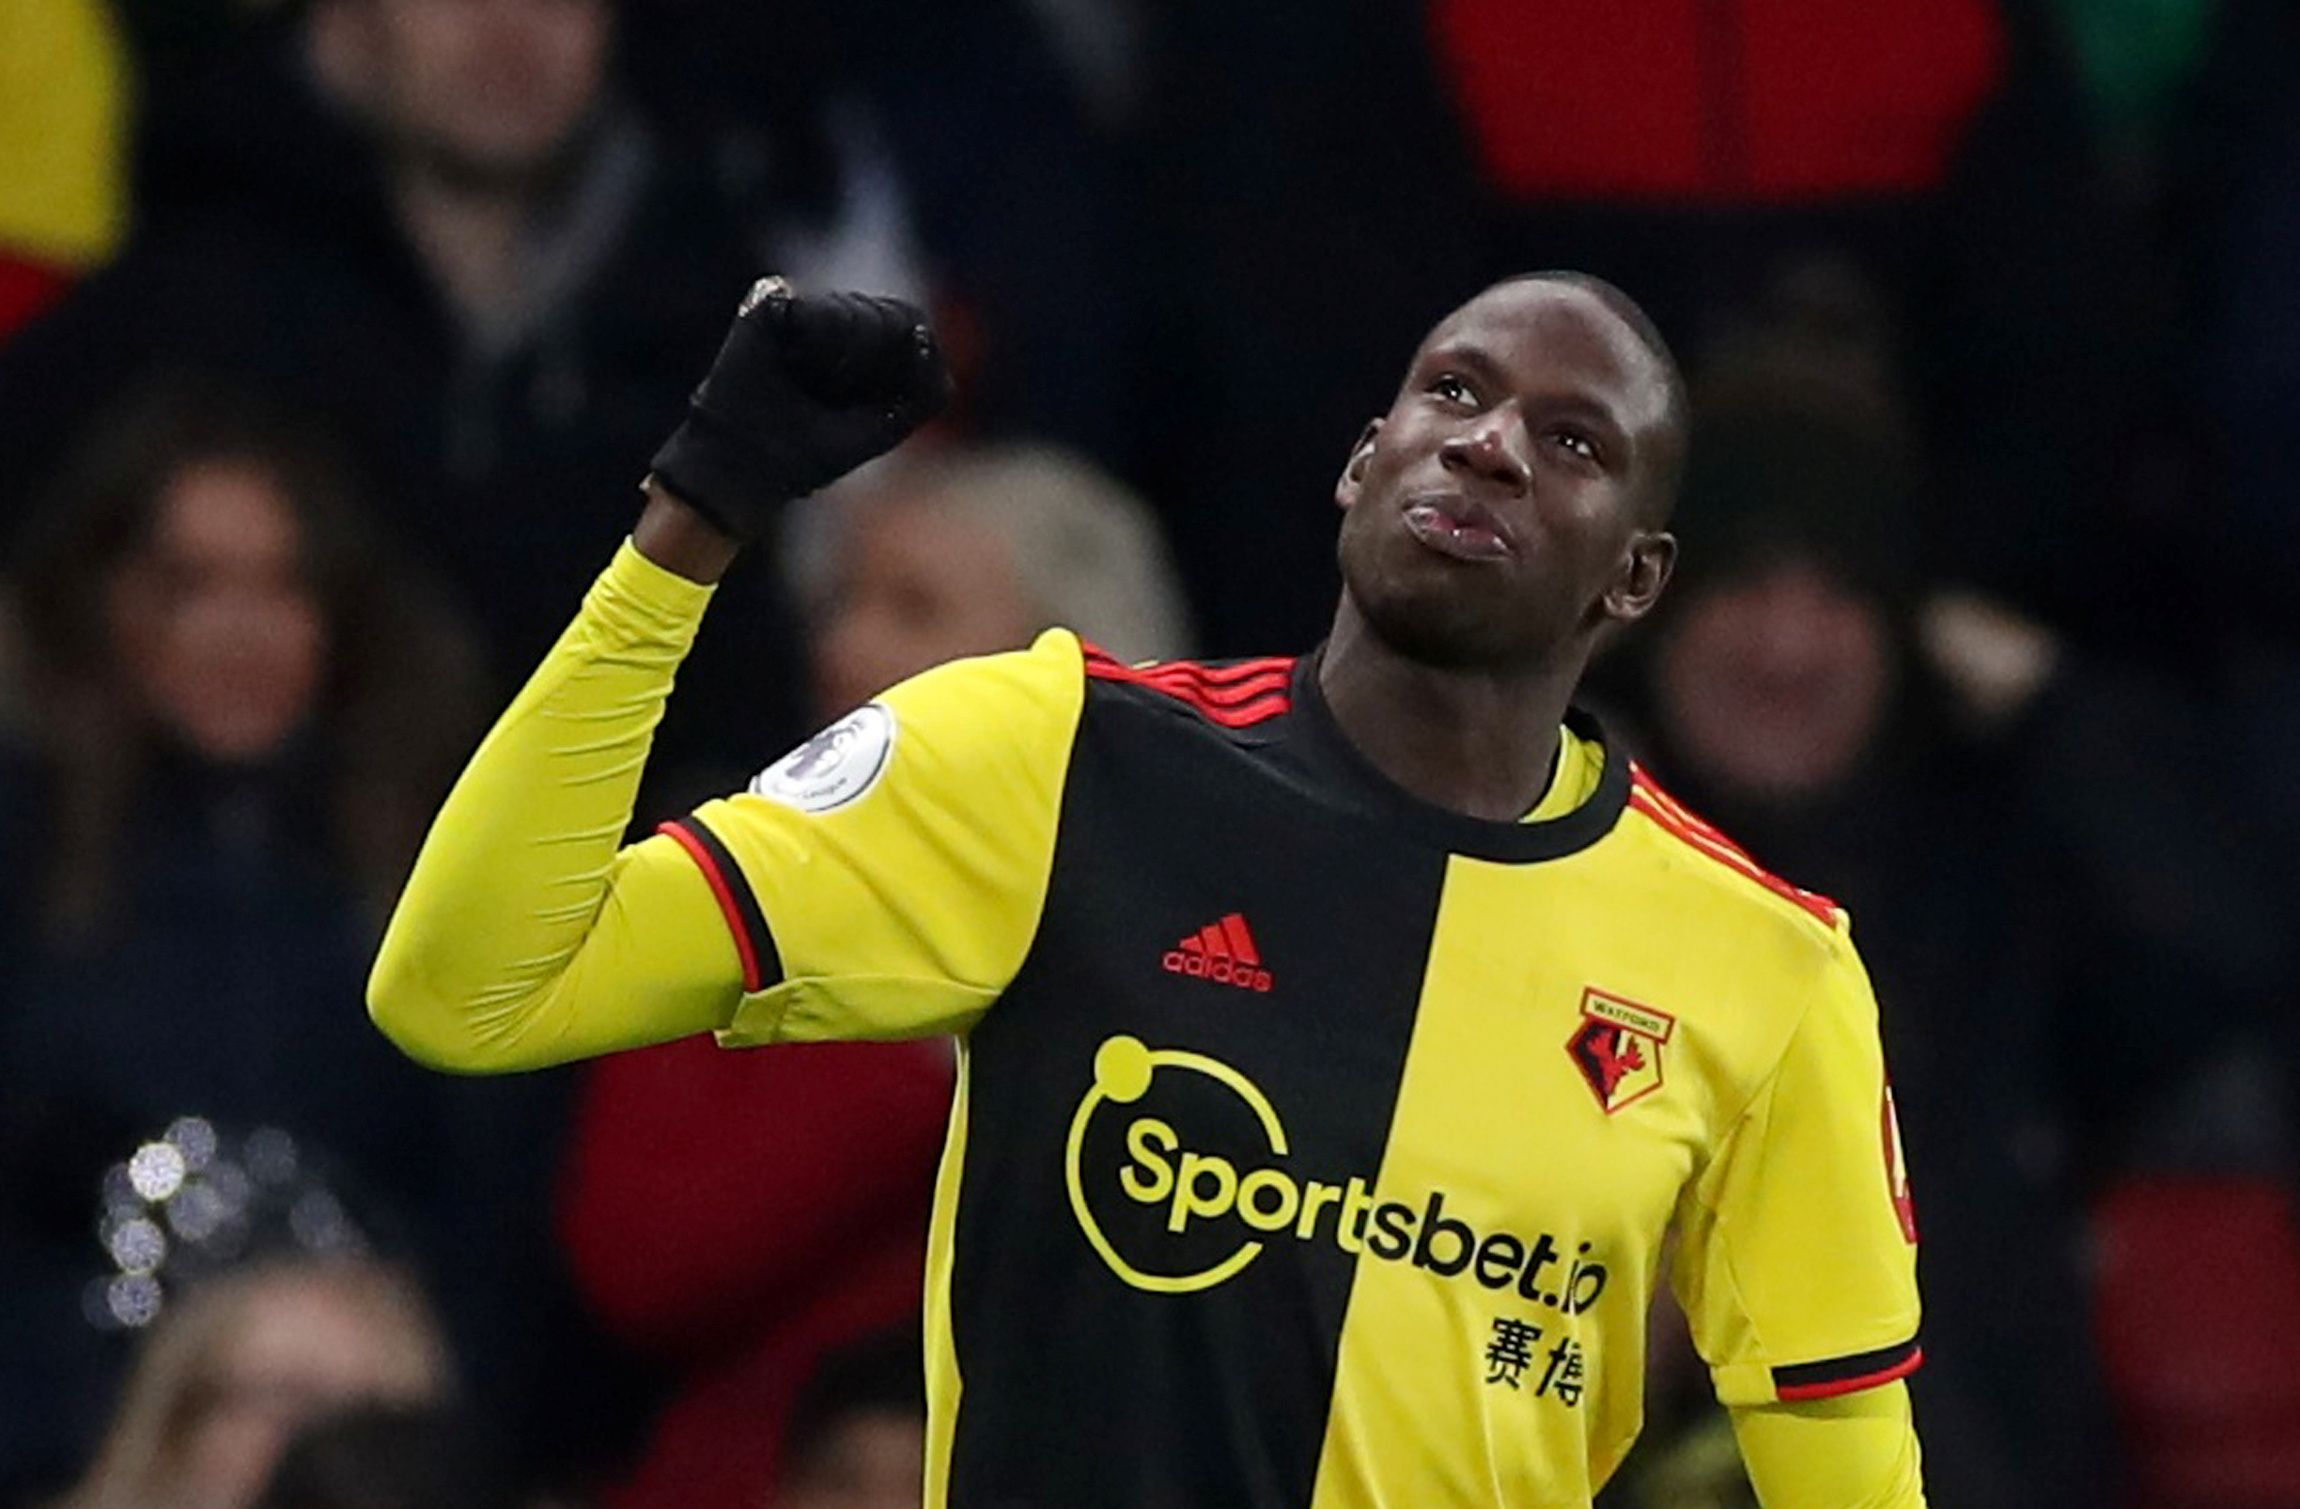 Soccer Football - Premier League - Watford v Wolverhampton Wanderers - Vicarage Road, Watford, Britain - January 1, 2020  Watford's Abdoulaye Doucoure celebrates scoring their second goal   REUTERS/David Klein  EDITORIAL USE ONLY. No use with unauthorized audio, video, data, fixture lists, club/league logos or "live" services. Online in-match use limited to 75 images, no video emulation. No use in betting, games or single club/league/player publications.  Please contact your account representati